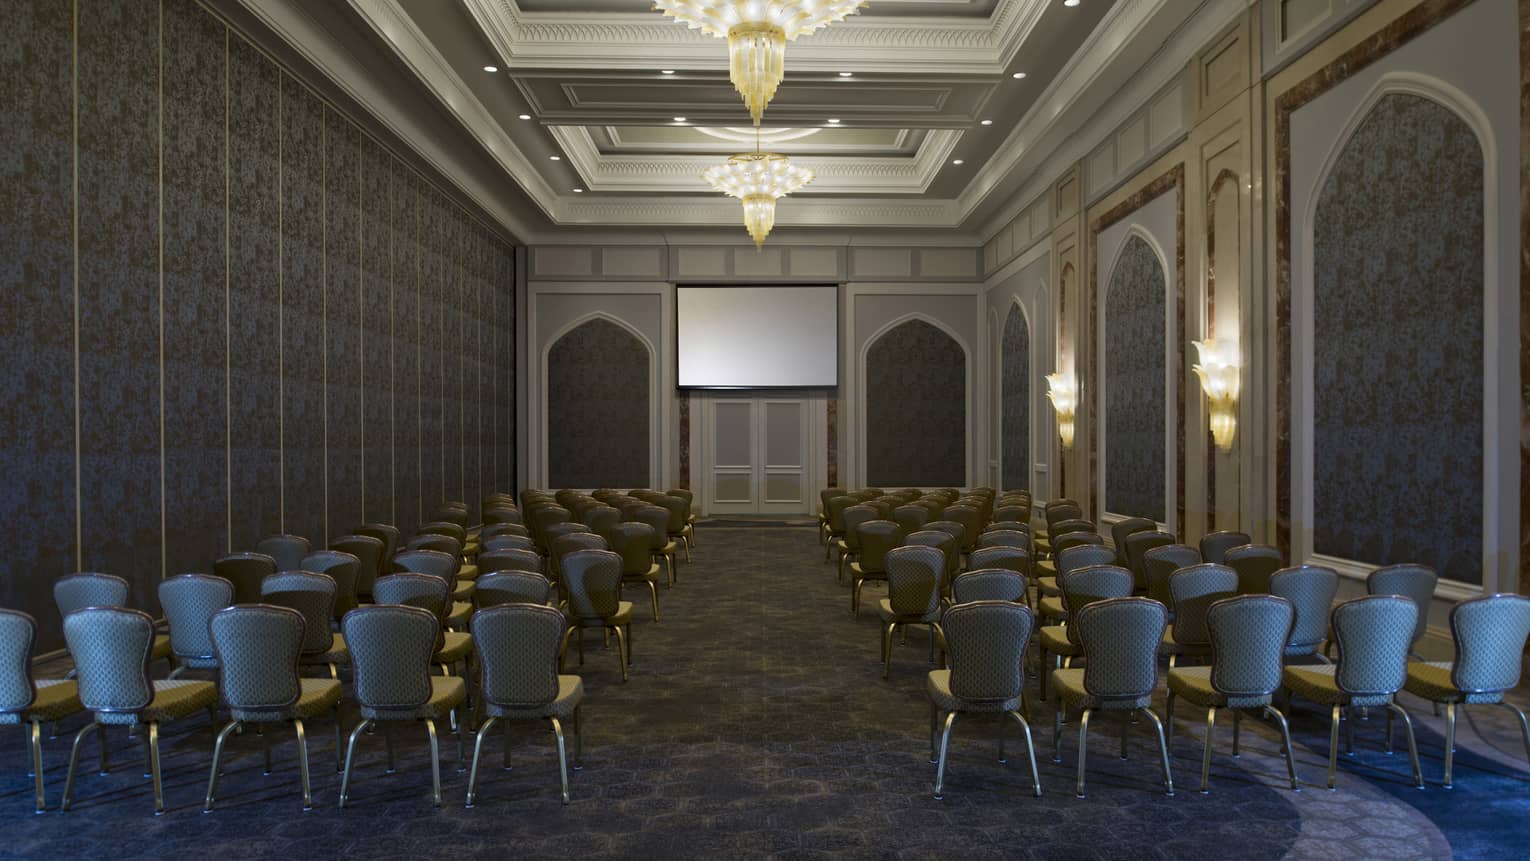 View down aisle between rows of chairs in ballroom meeting space 